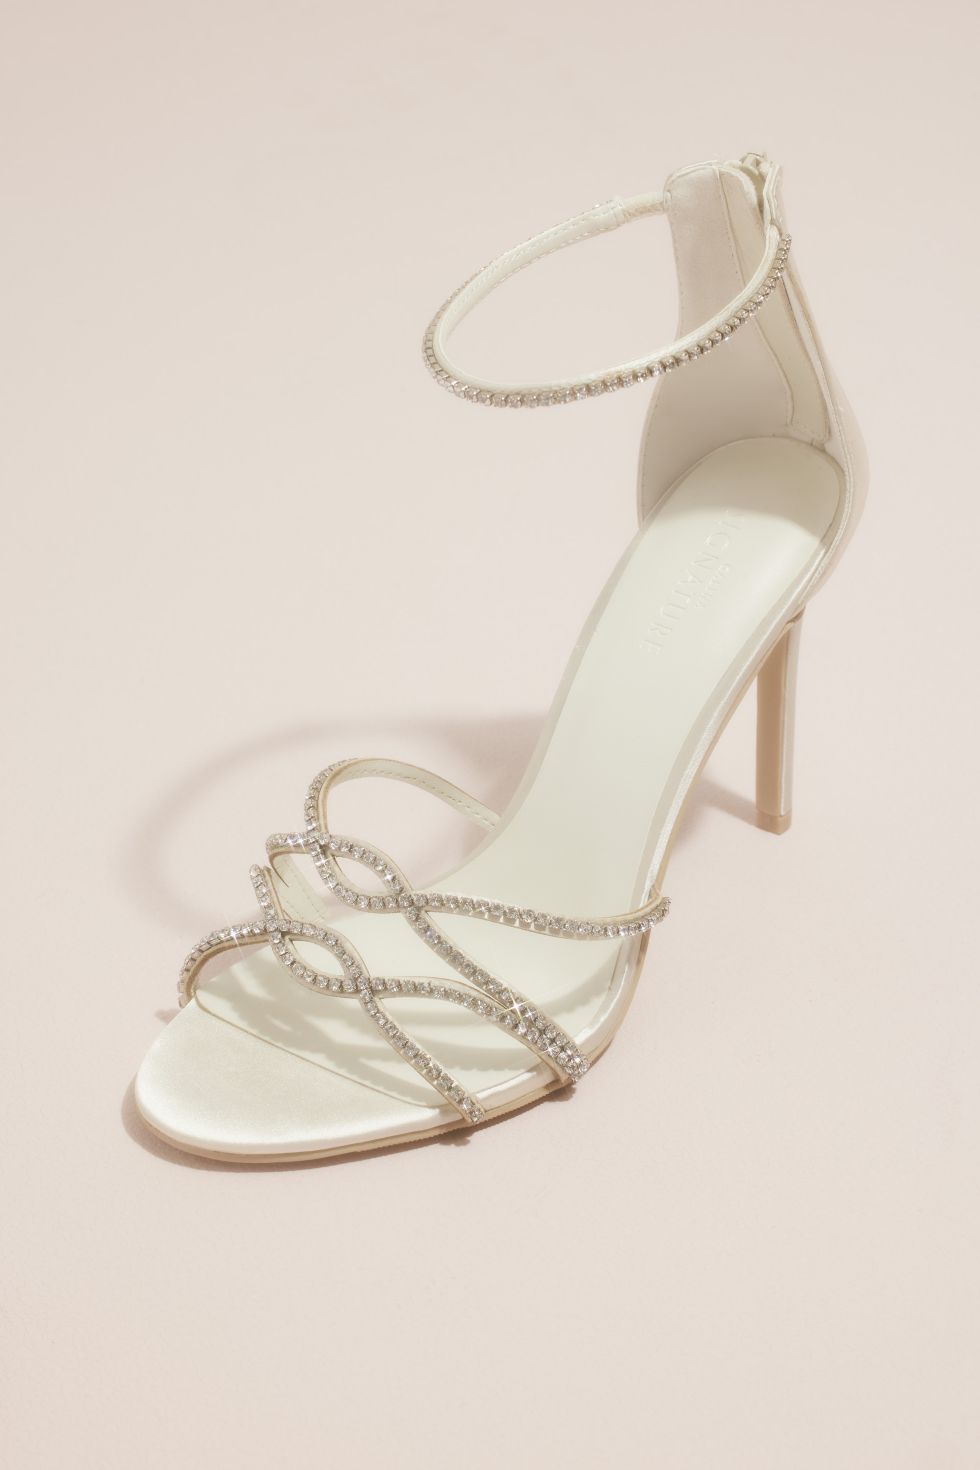 Shoes: Style Inspiration, Tips & Trends 2022 | David's Bridal